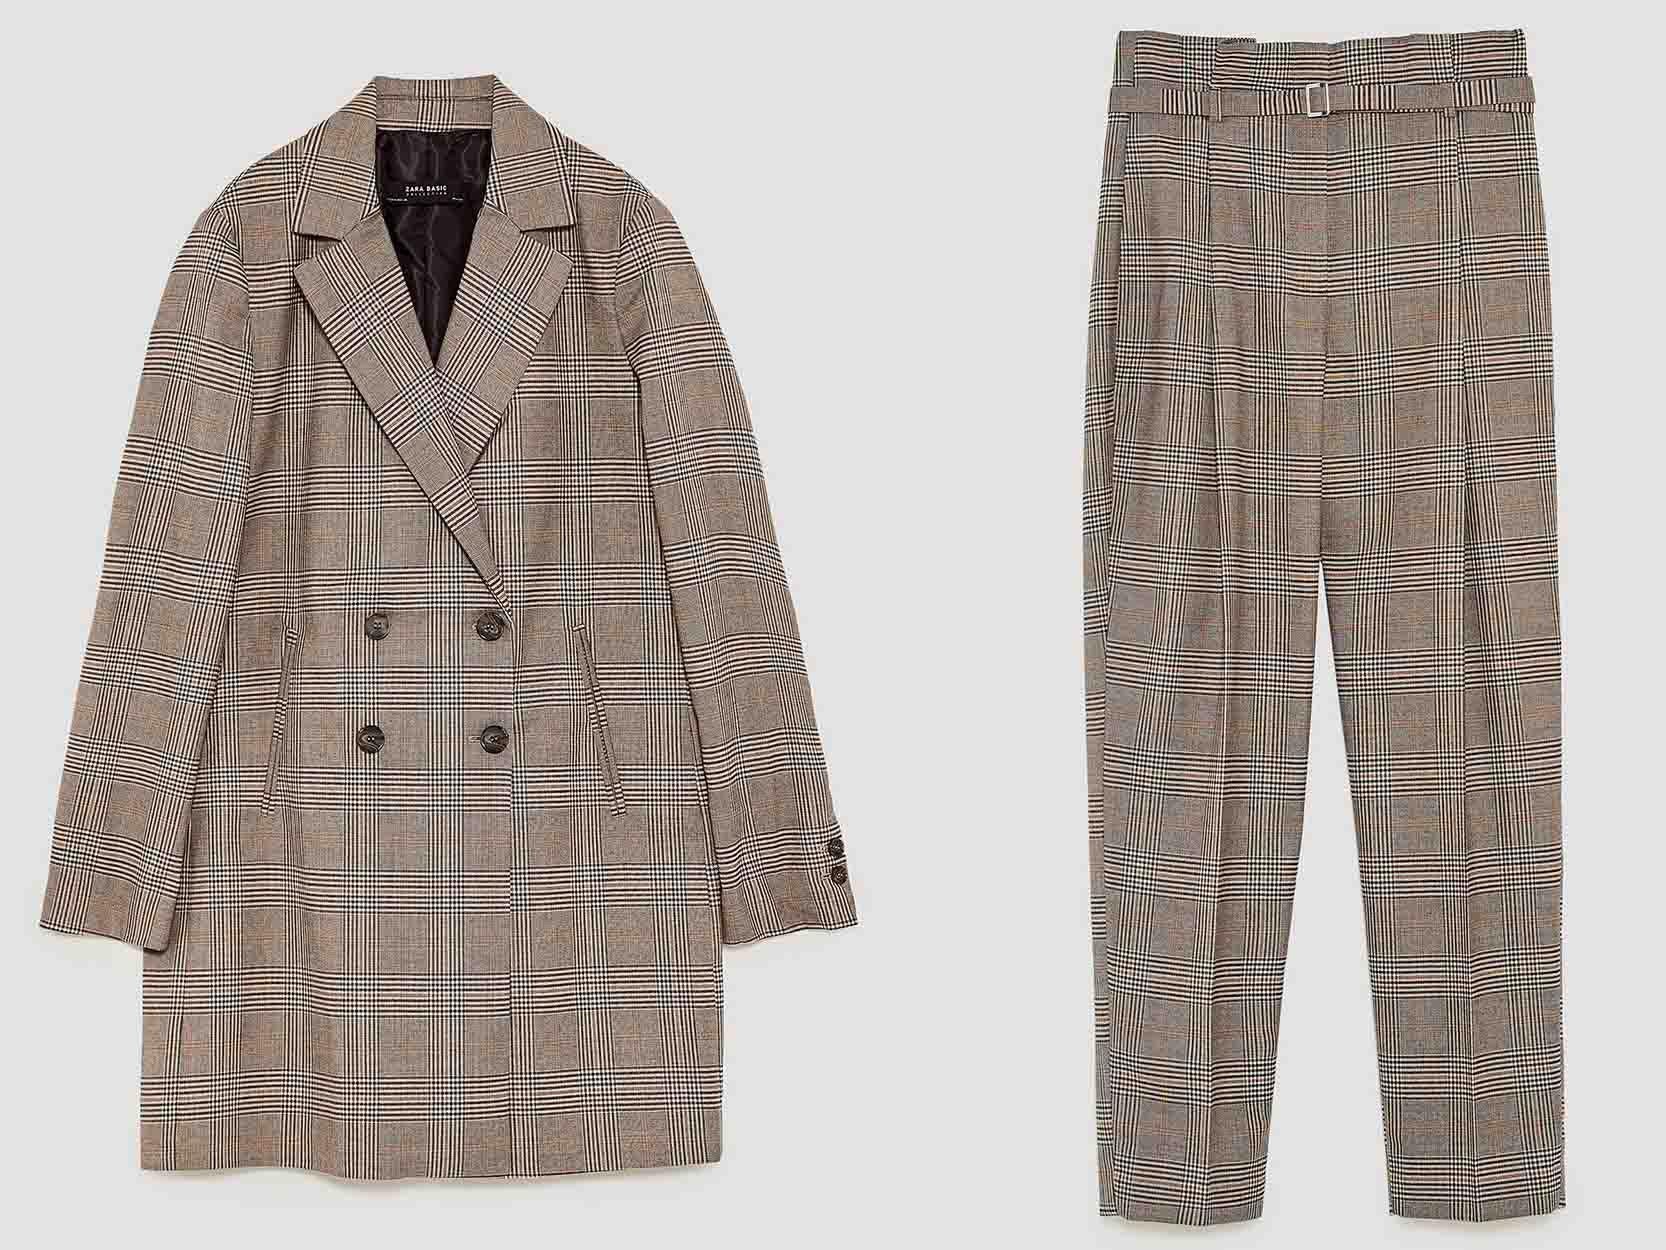 Double Breasted Coat, £69.99, Checked Trousers, £29.99, Zara